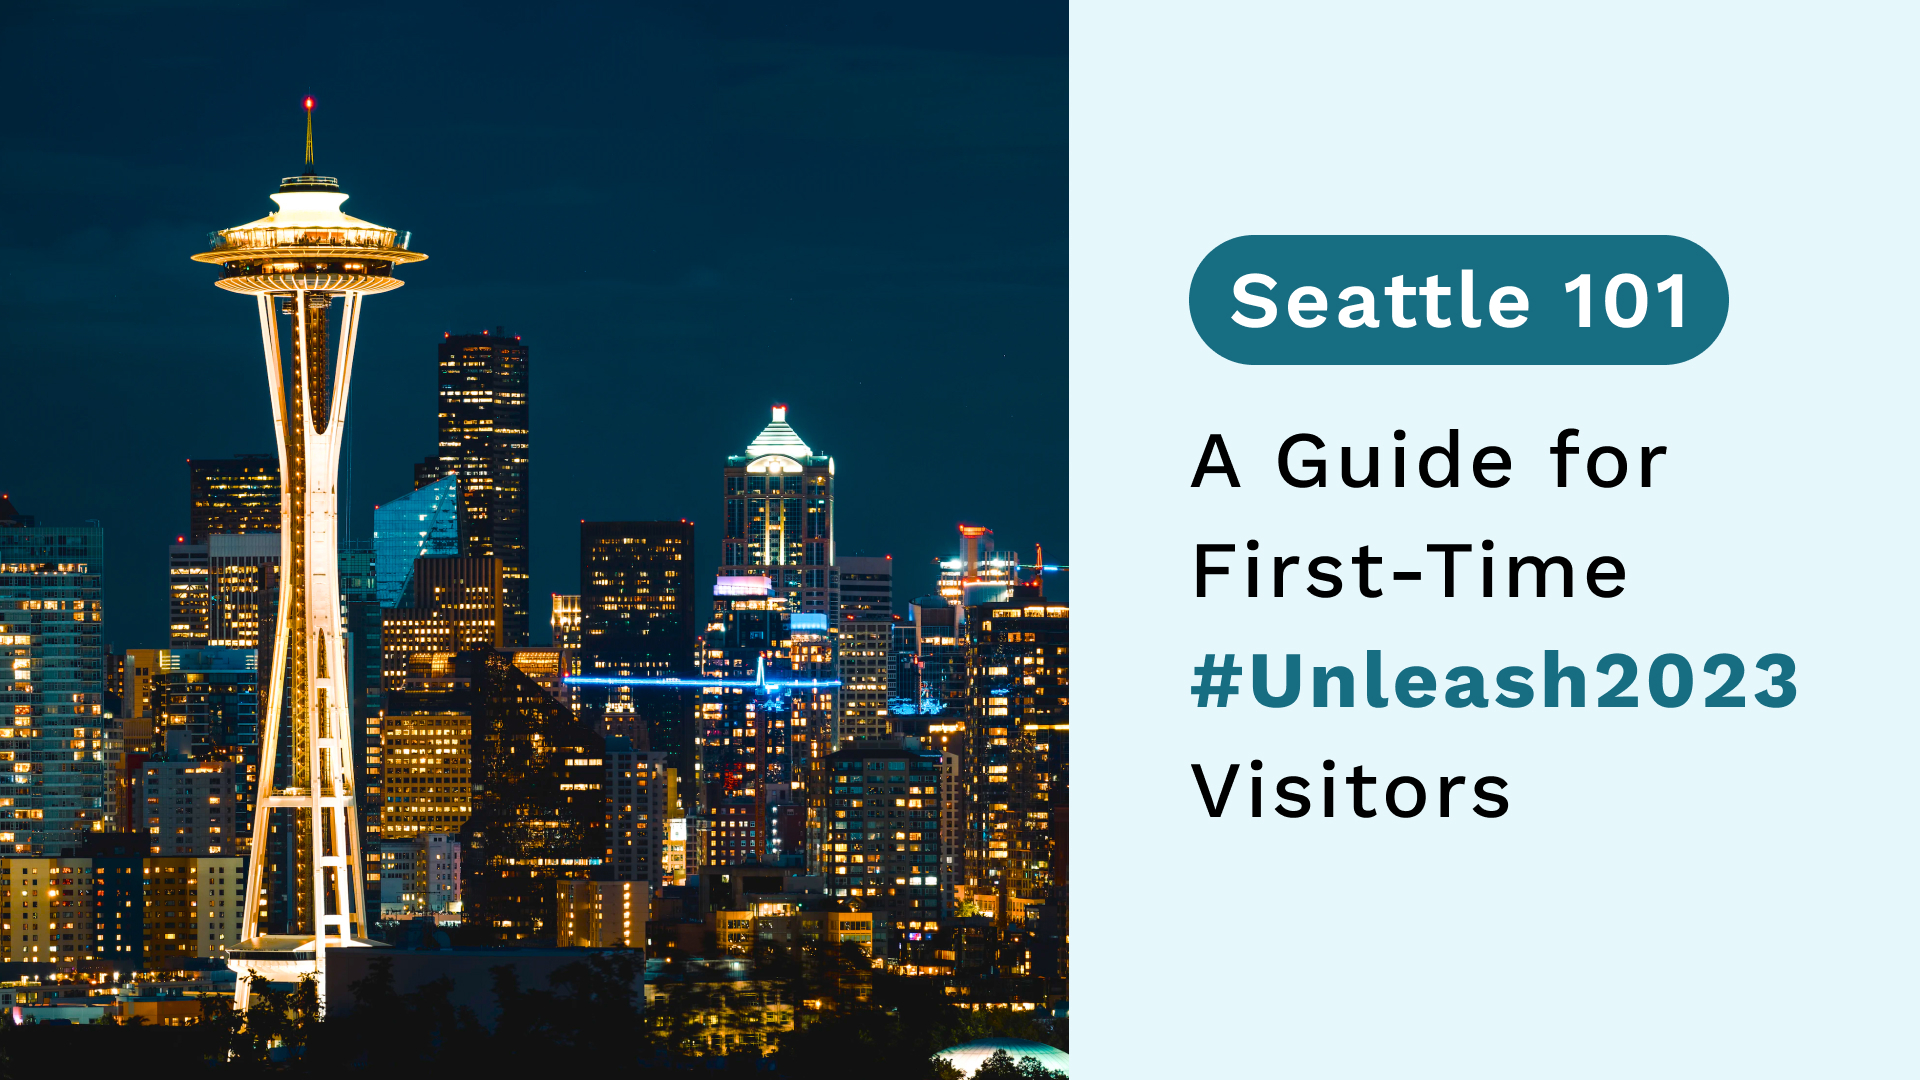 Seattle 101: A Guide for First-Time #Unleash2023 Visitors